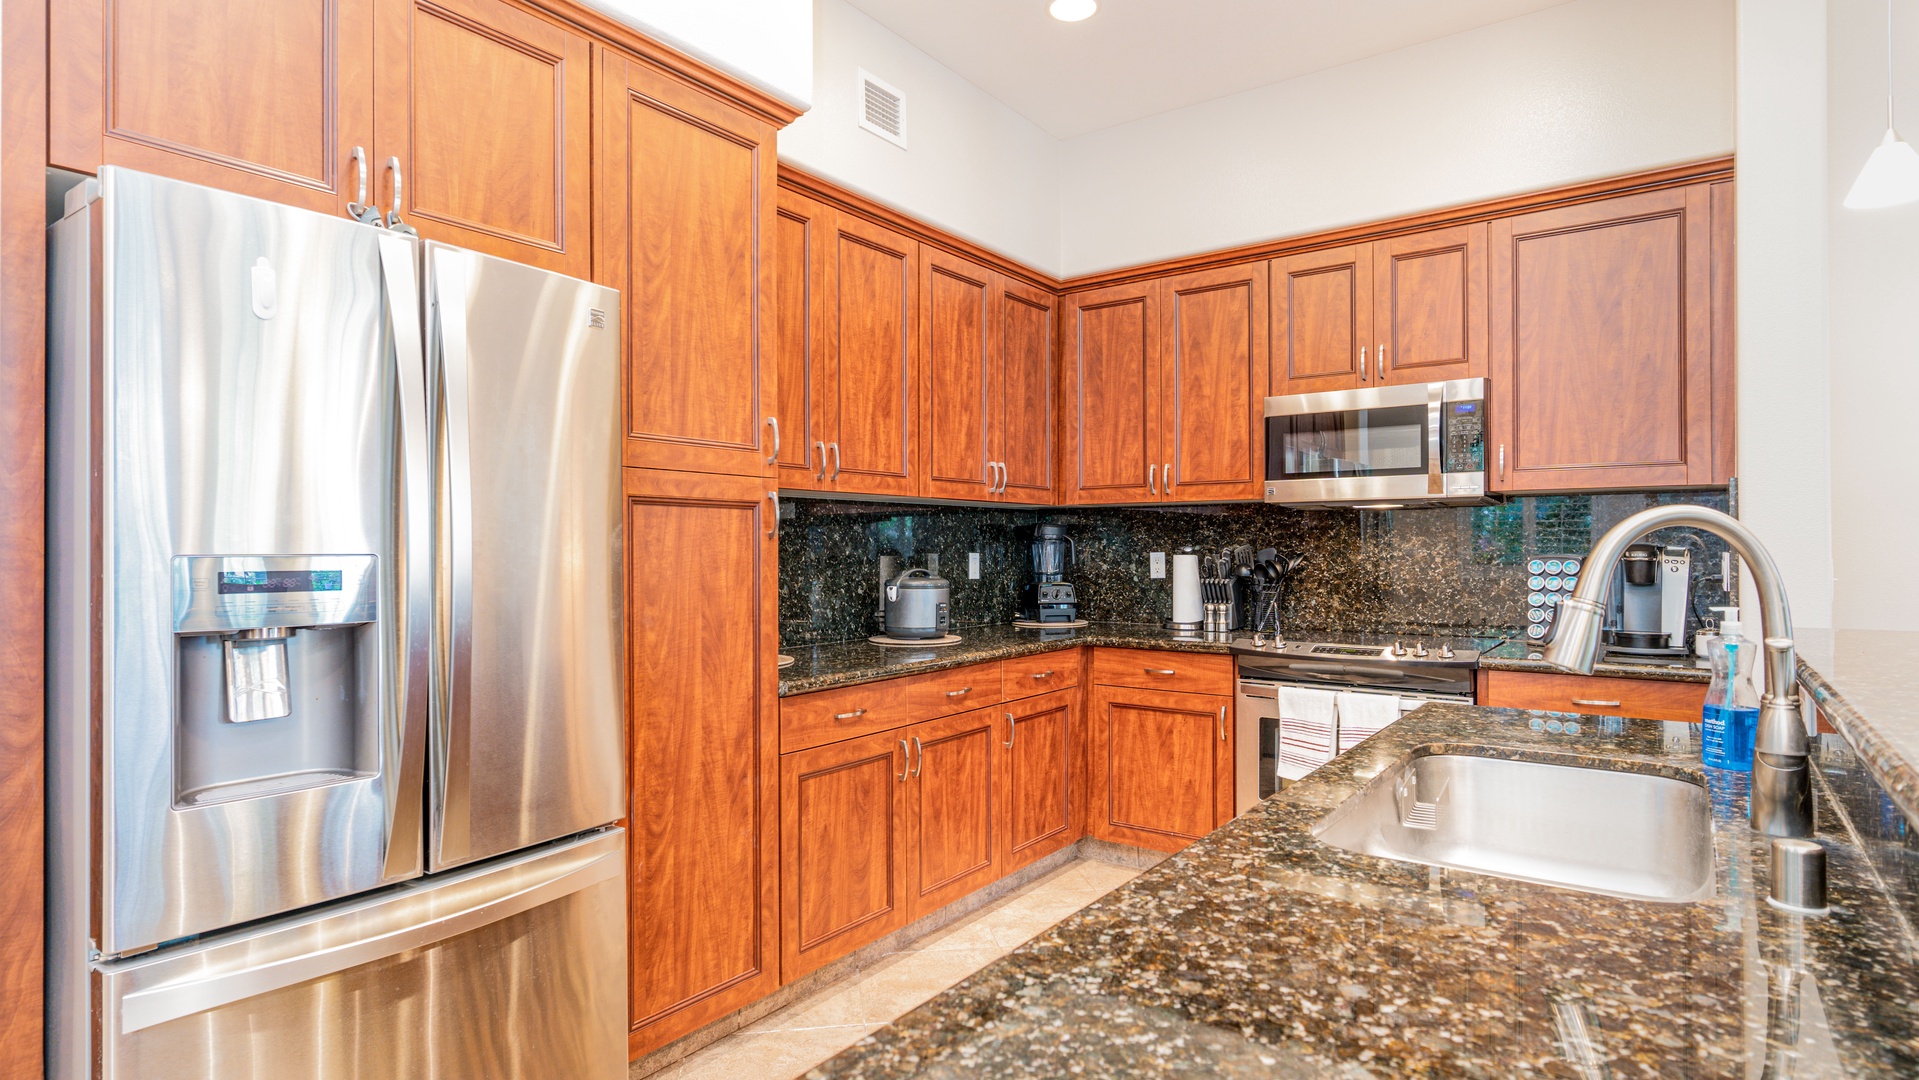 Kapolei Vacation Rentals, Coconut Plantation 1234-2 - The spacious kitchen has all your needs for a relaxing vacation.